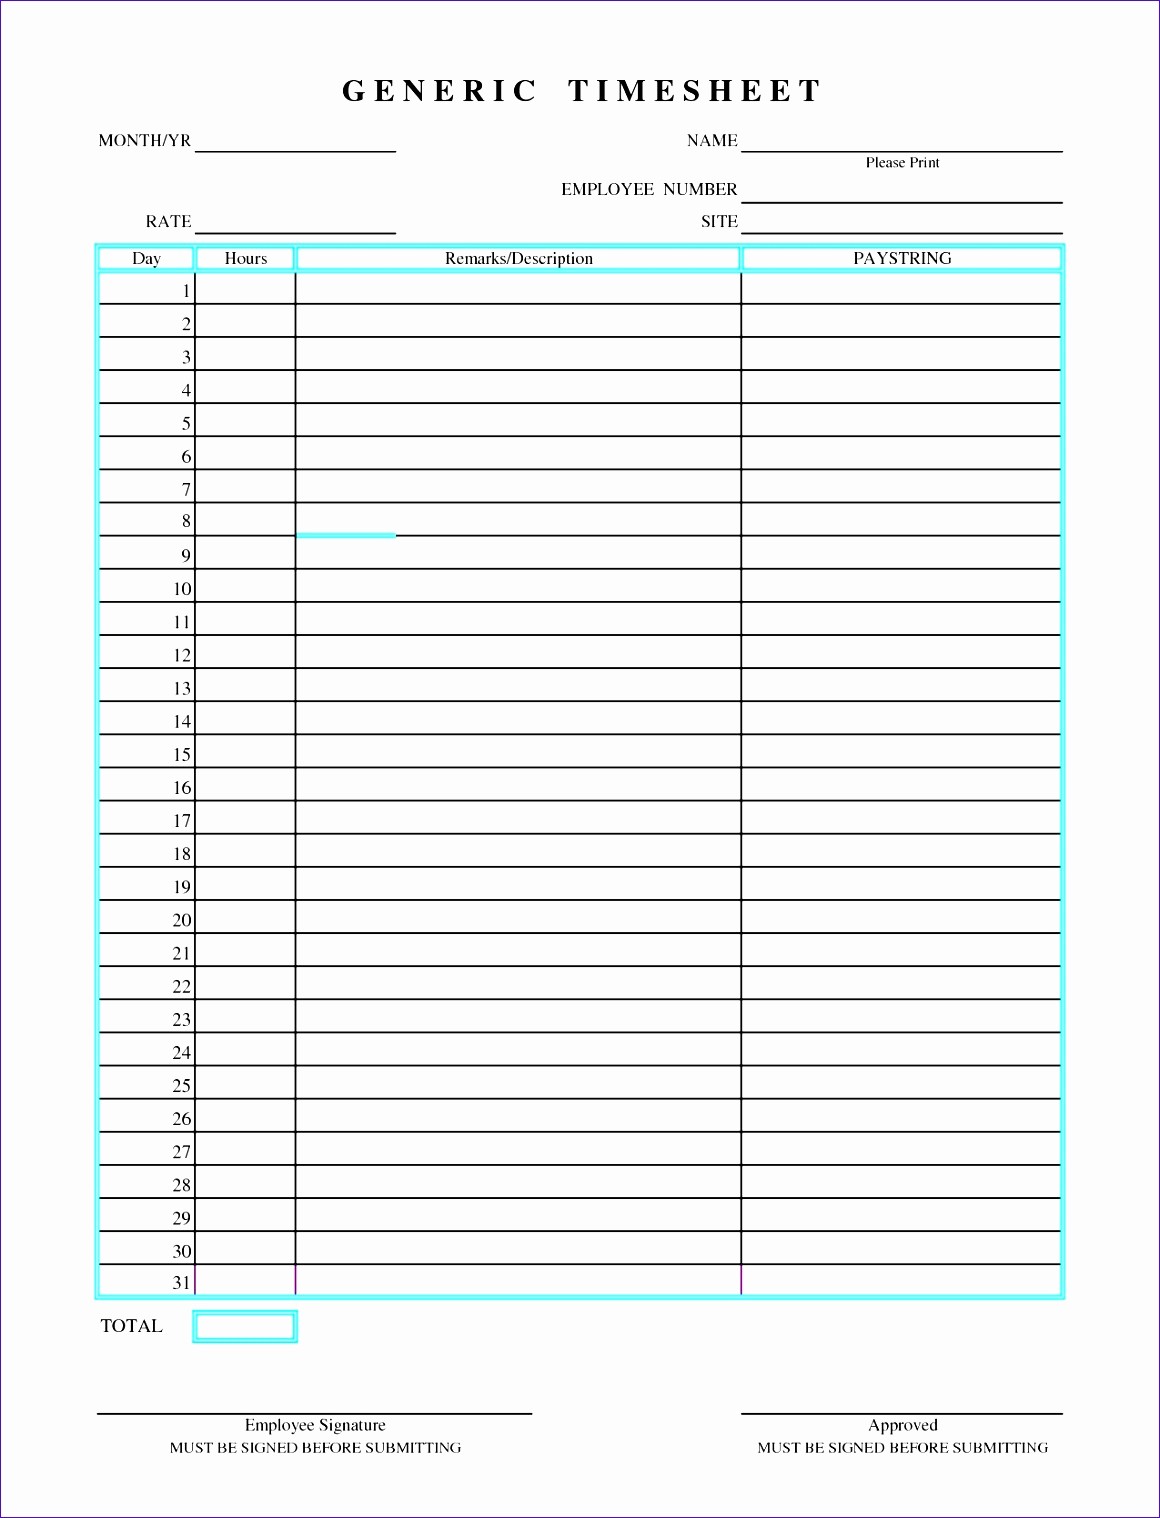 Excel Timesheet Template Multiple Employees New 8 Excel Weekly Timesheet Template with formulas